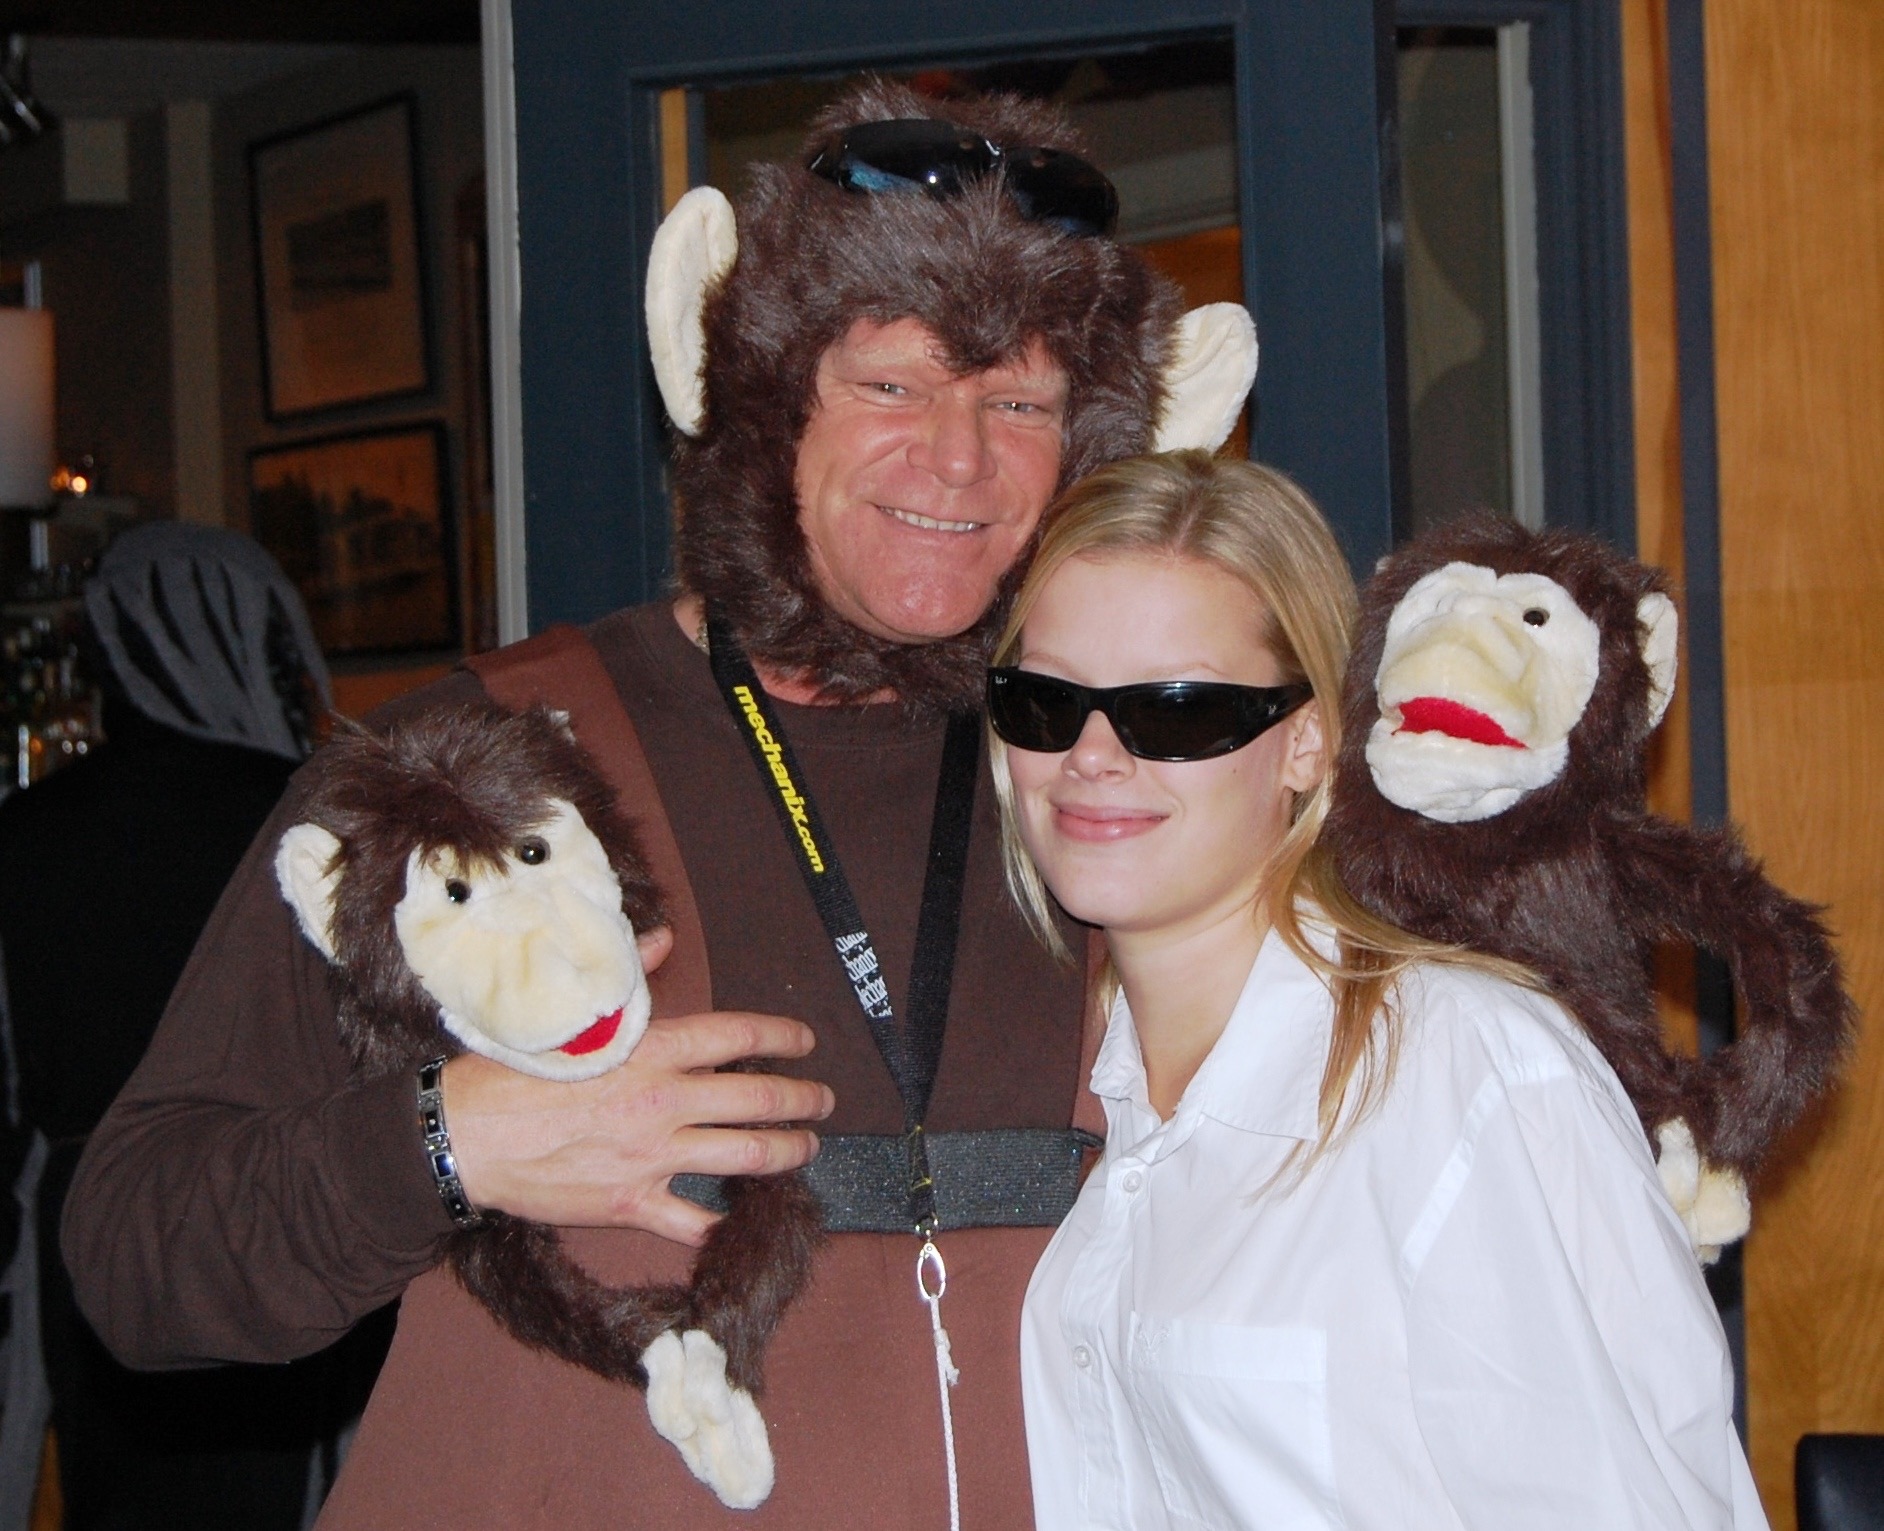 Mike Holmes dressed as a monkey while standing with his daughter